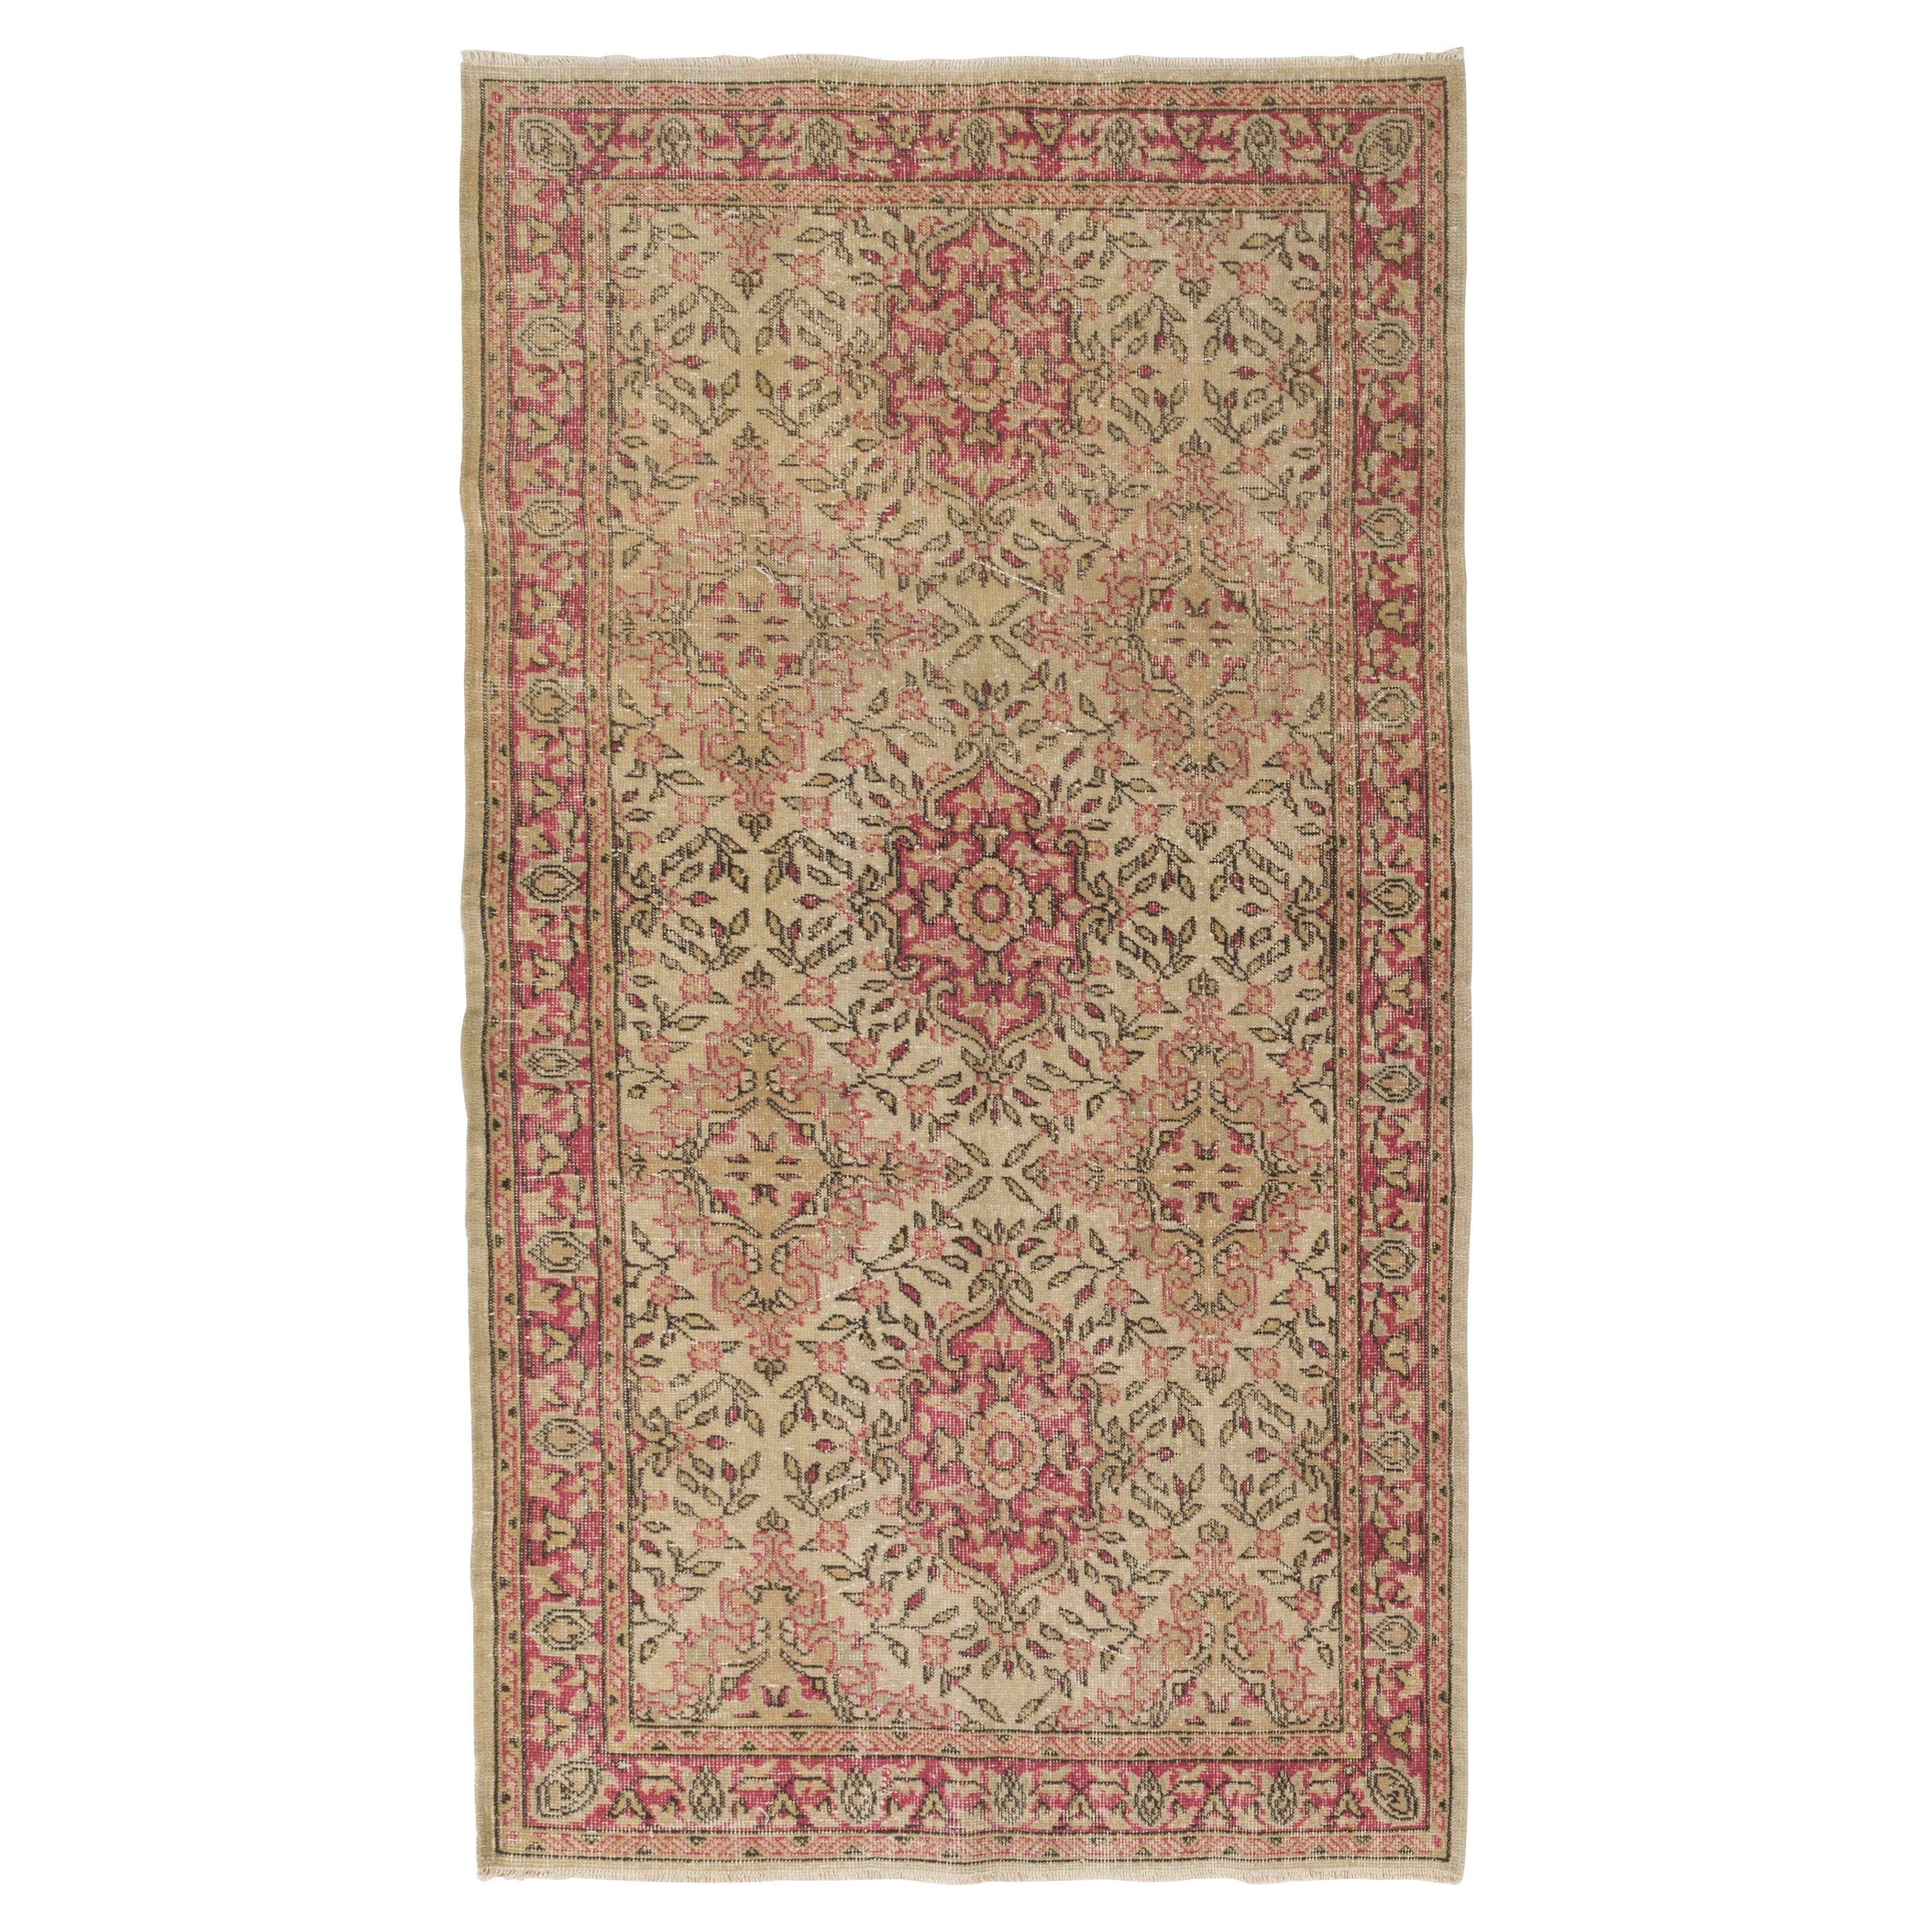 5.3x8.6 Ft Mid-Century Hand-Knotted Turkish Area Rug Vintage Oushak Carpet in Soft Colors Very Good Condition